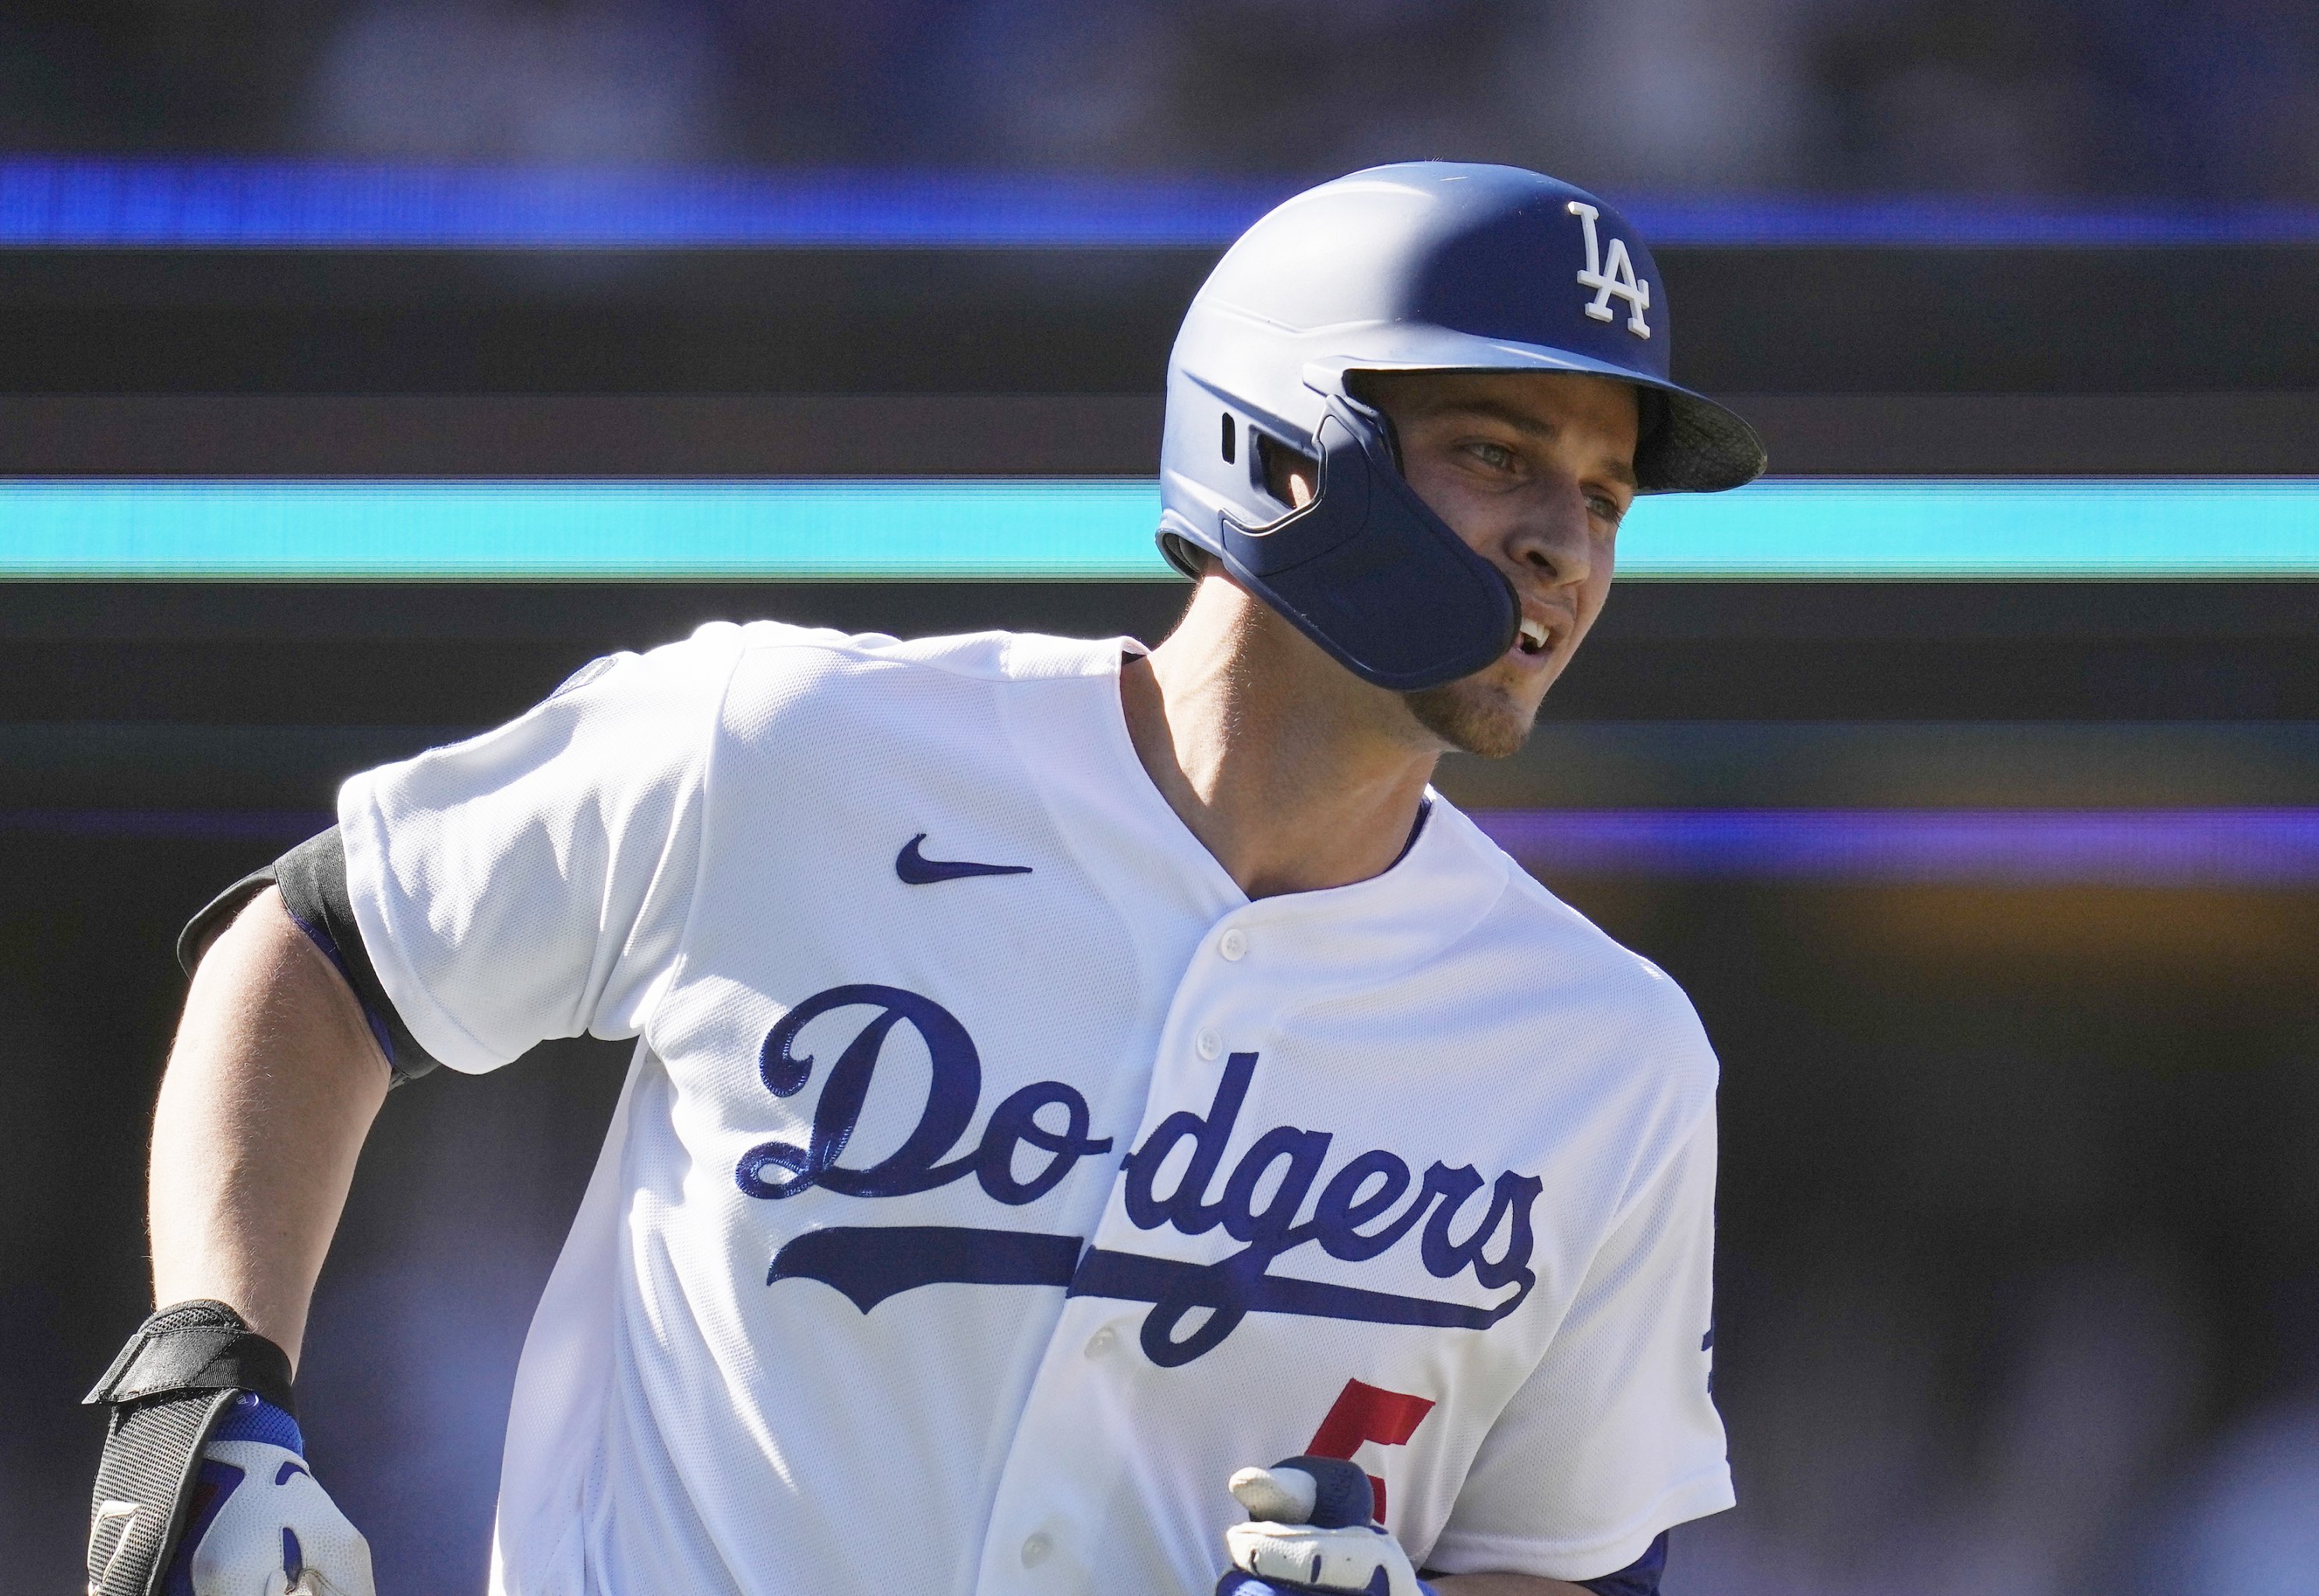 Ranking the Top 10 Landing Spots for Dodgers' Corey Seager in MLB